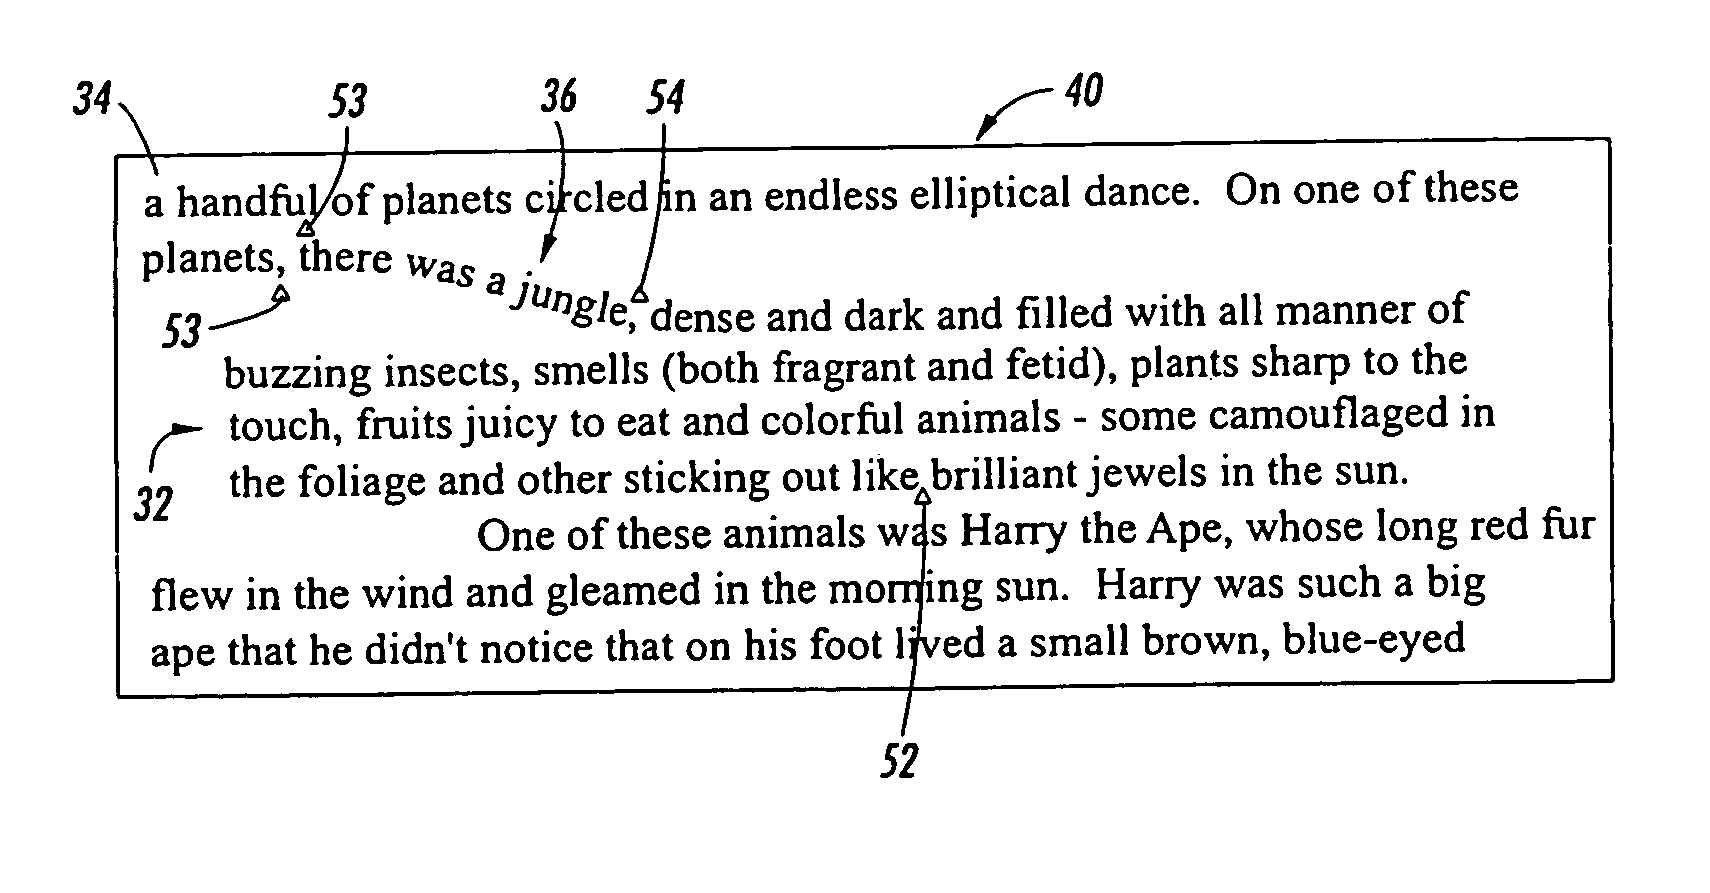 Swoopy text for connecting annotations in fluid documents